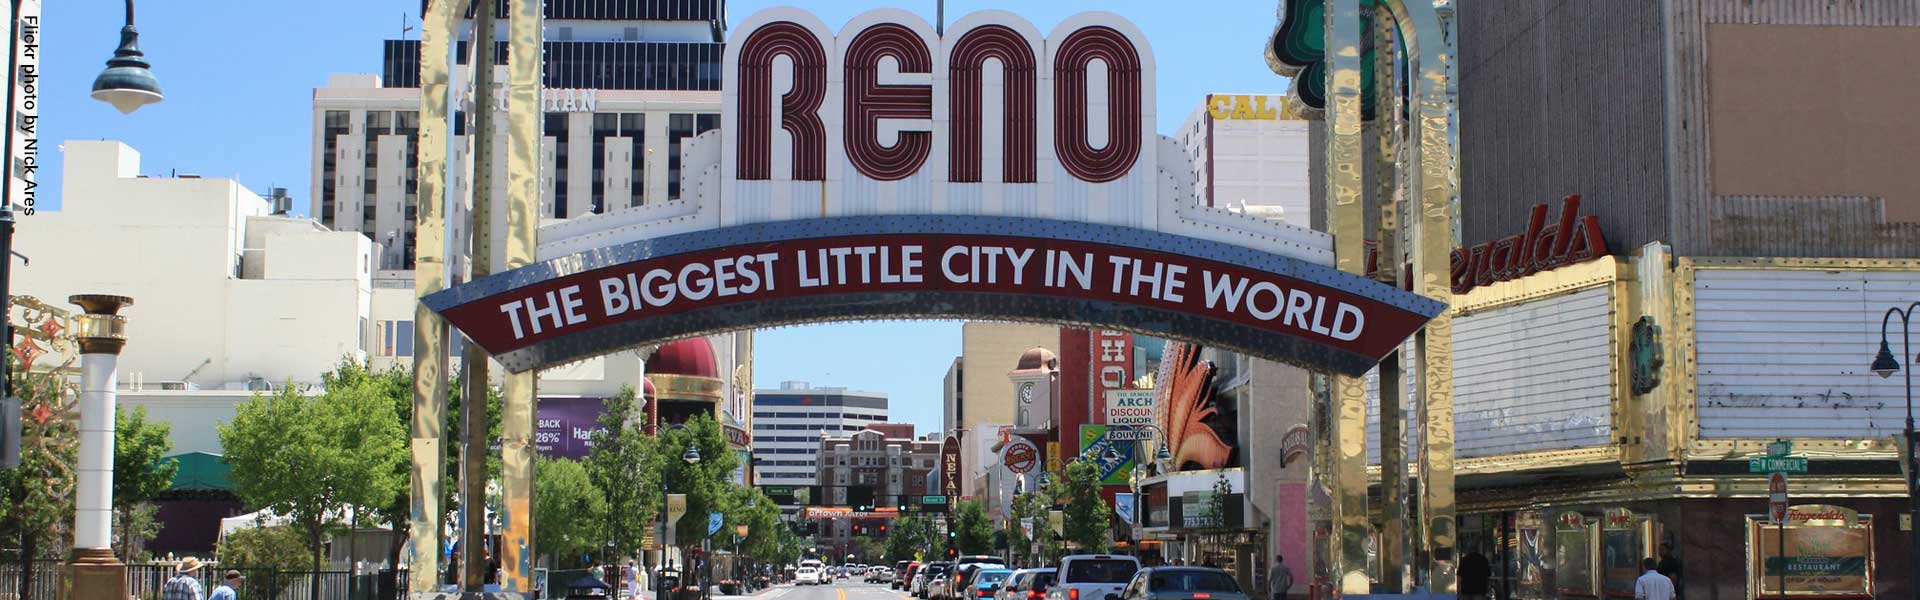 Reno the biggest little city in the world sign